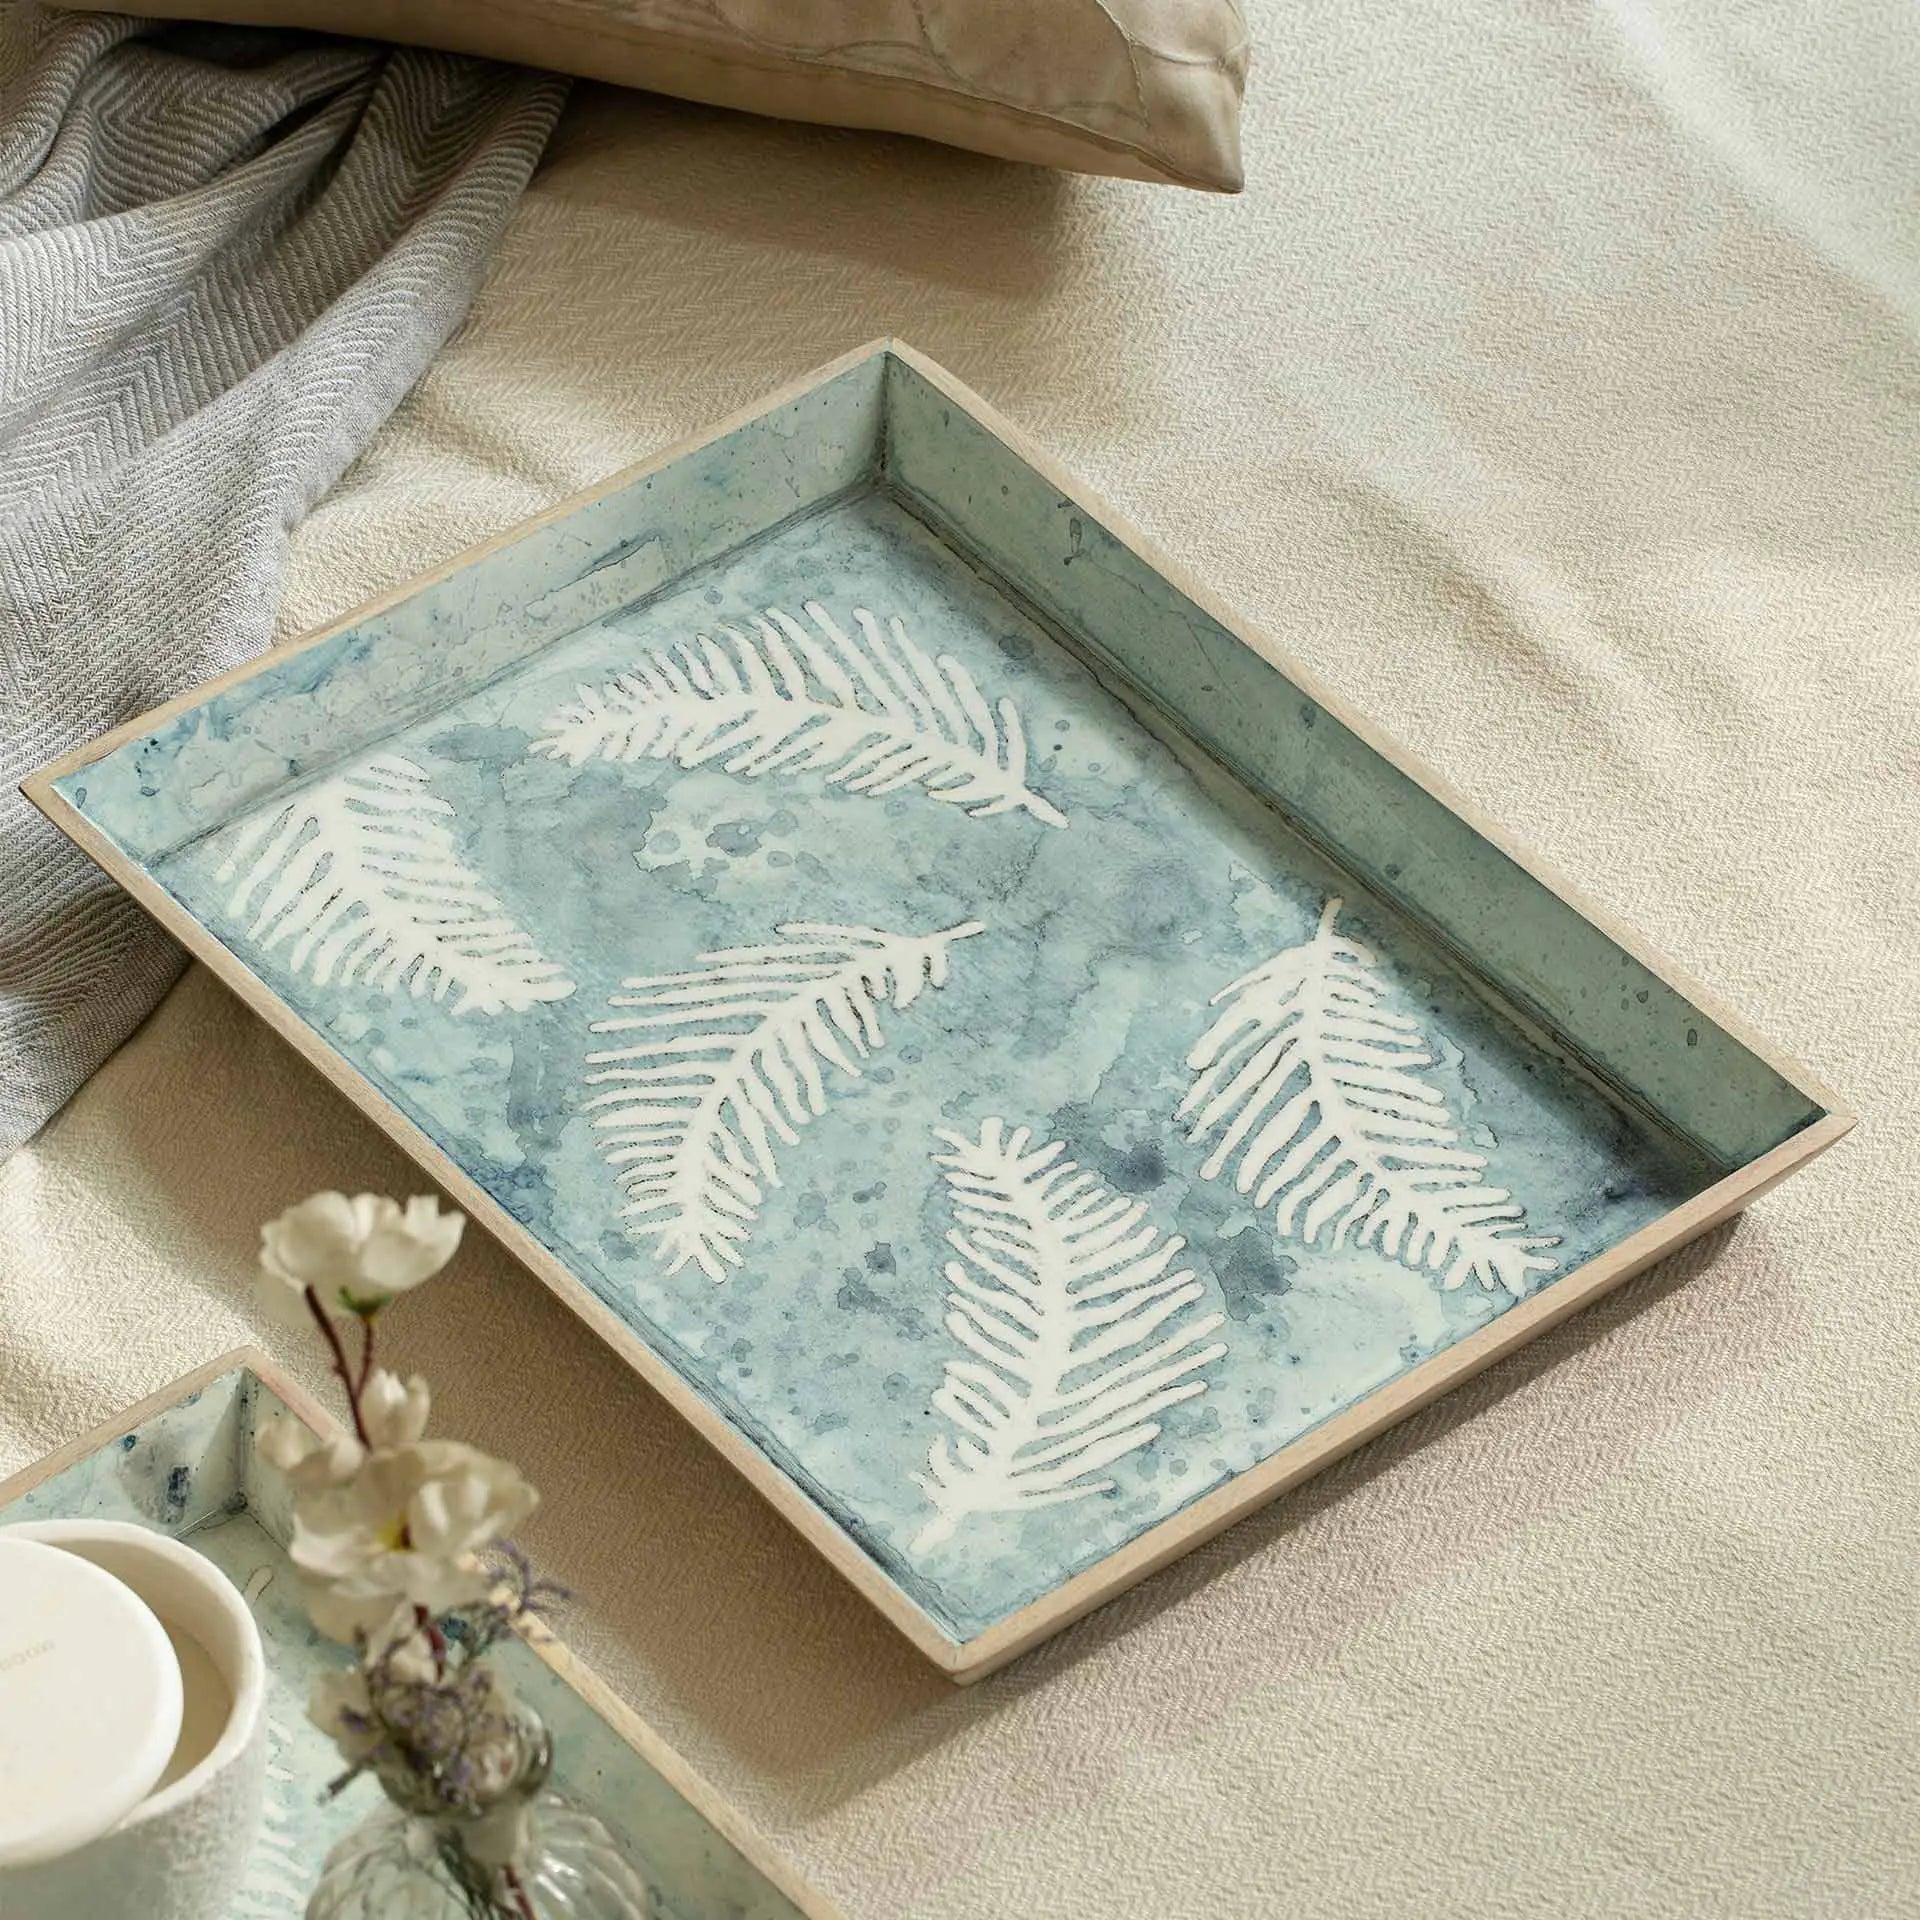 Aamay Wooden Tray - Large